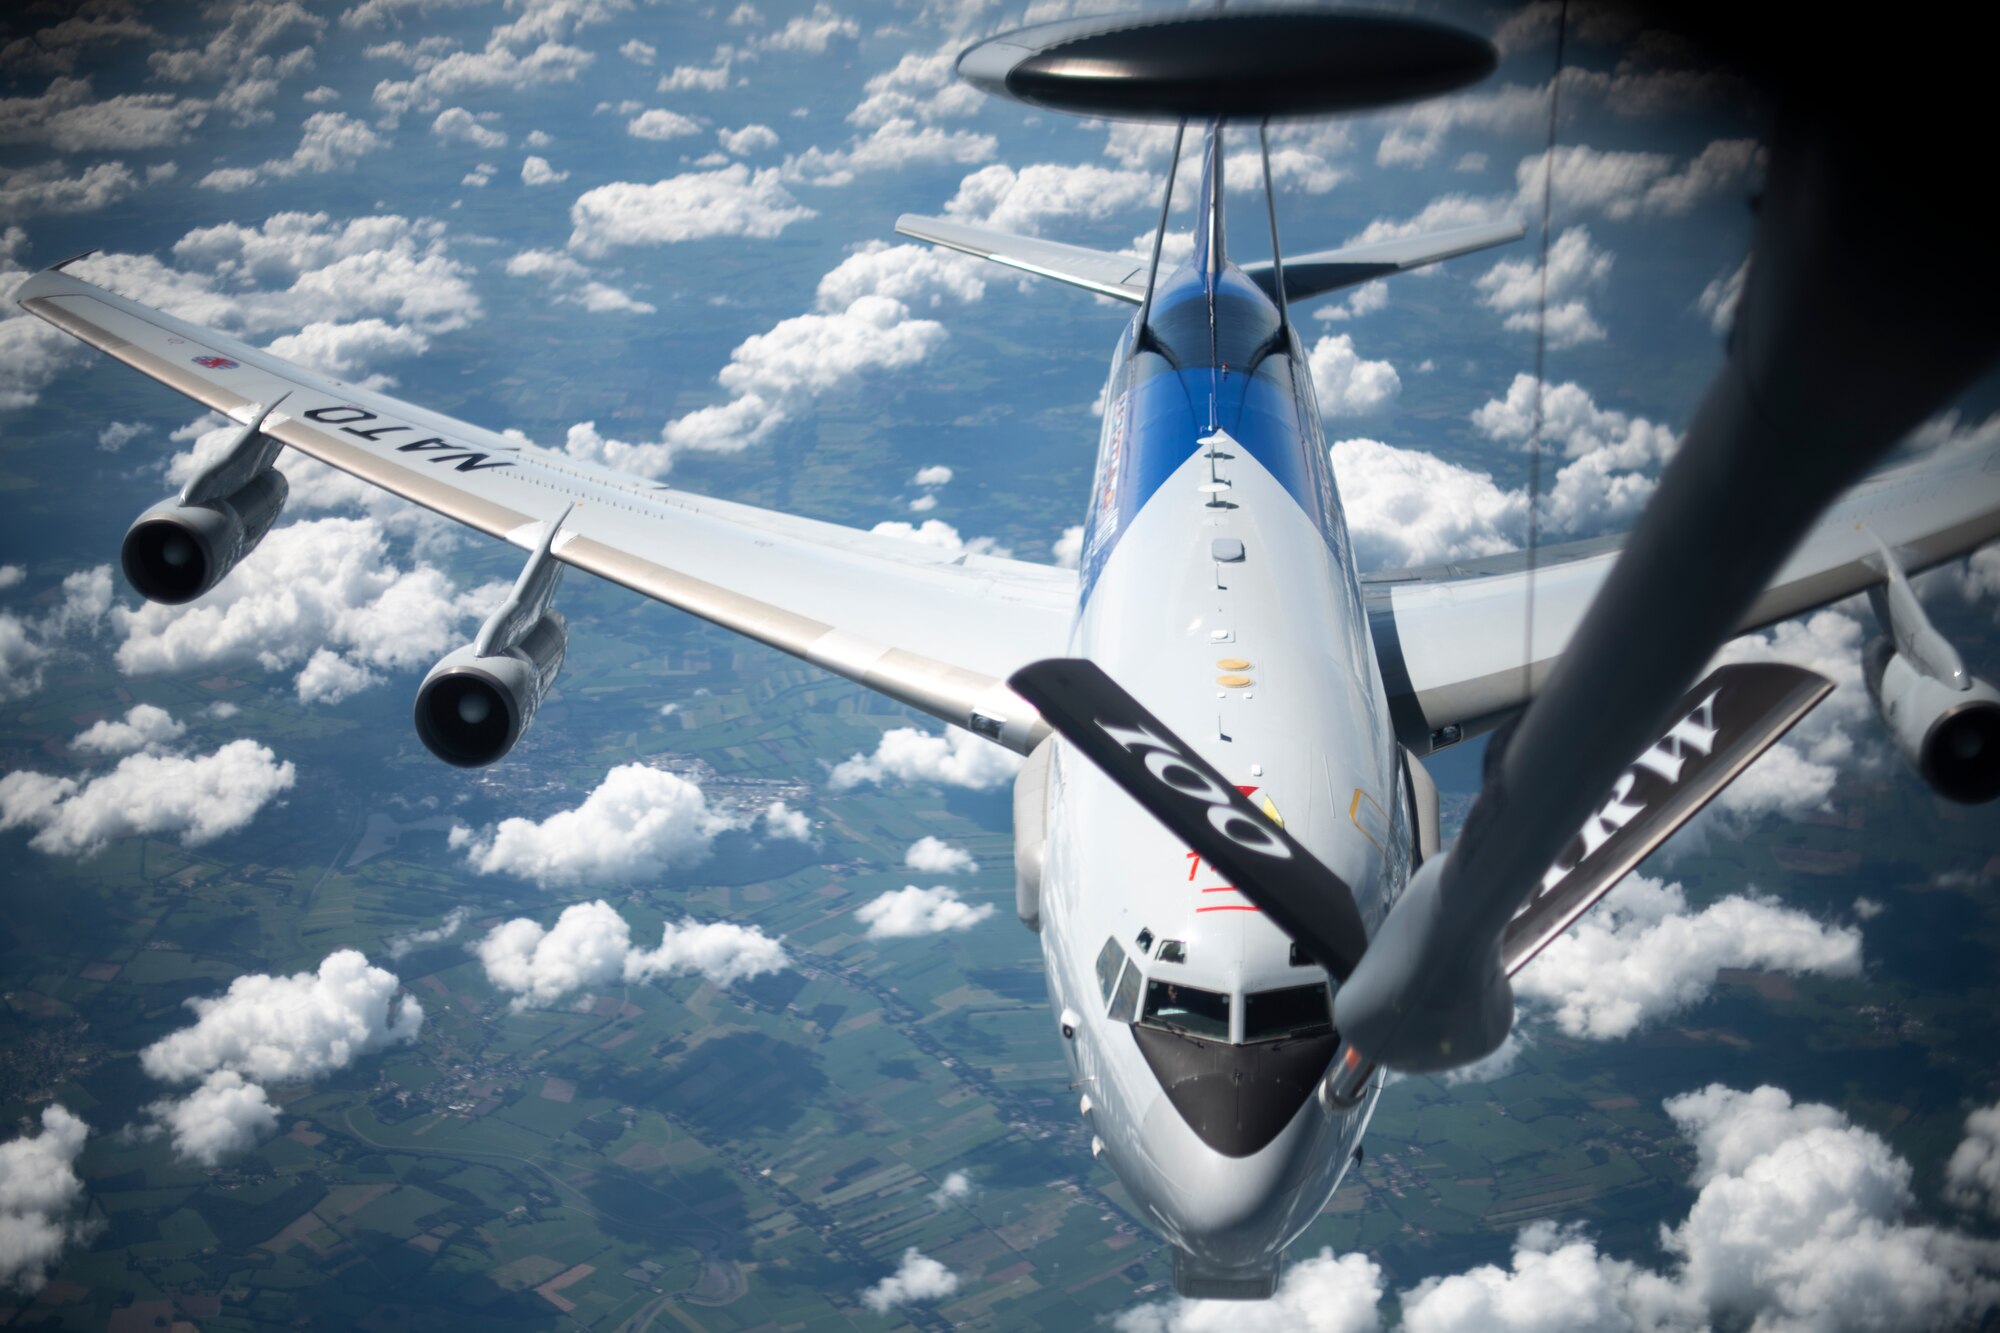 A NATO E-3 Sentry from Geilenkirchen NATO Air Base approaches a U.S. Air Force KC-135 Stratotanker assigned to the 100th Air Refueling Wing, RAF Mildenhall, England, to receive fuel over Germany, July 17, 2020. The 100th ARW provides unrivaled air refueling support throughout the European and African areas of responsibility. (U.S. Air Force photo by Tech. Sgt. Emerson Nuñez)